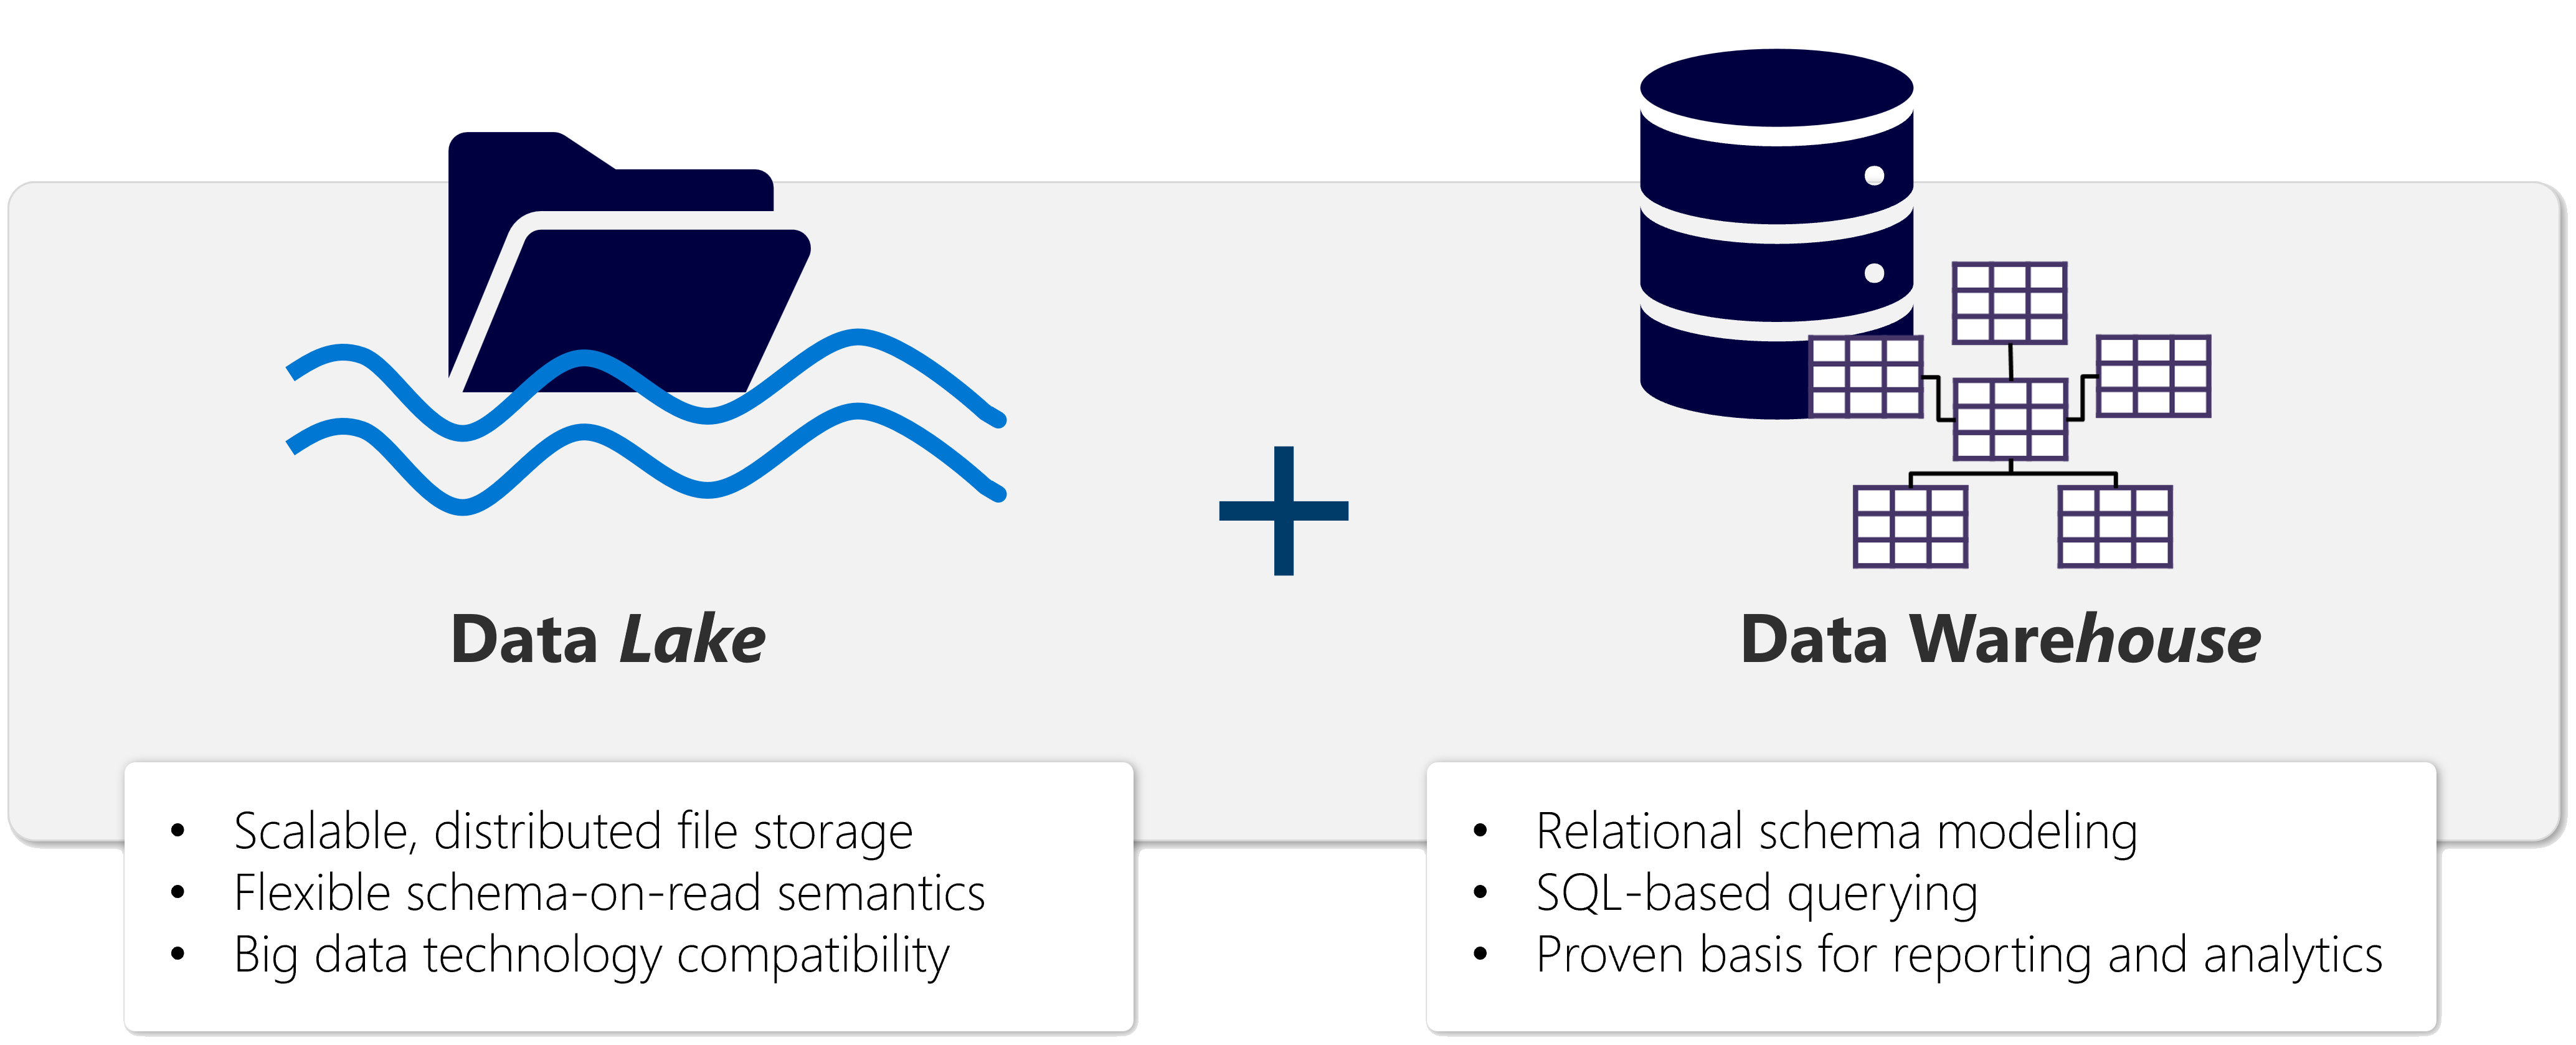 Diagram of a lakehouse, displaying the folder structure of a data lake and the relational capabilities of a data warehouse.